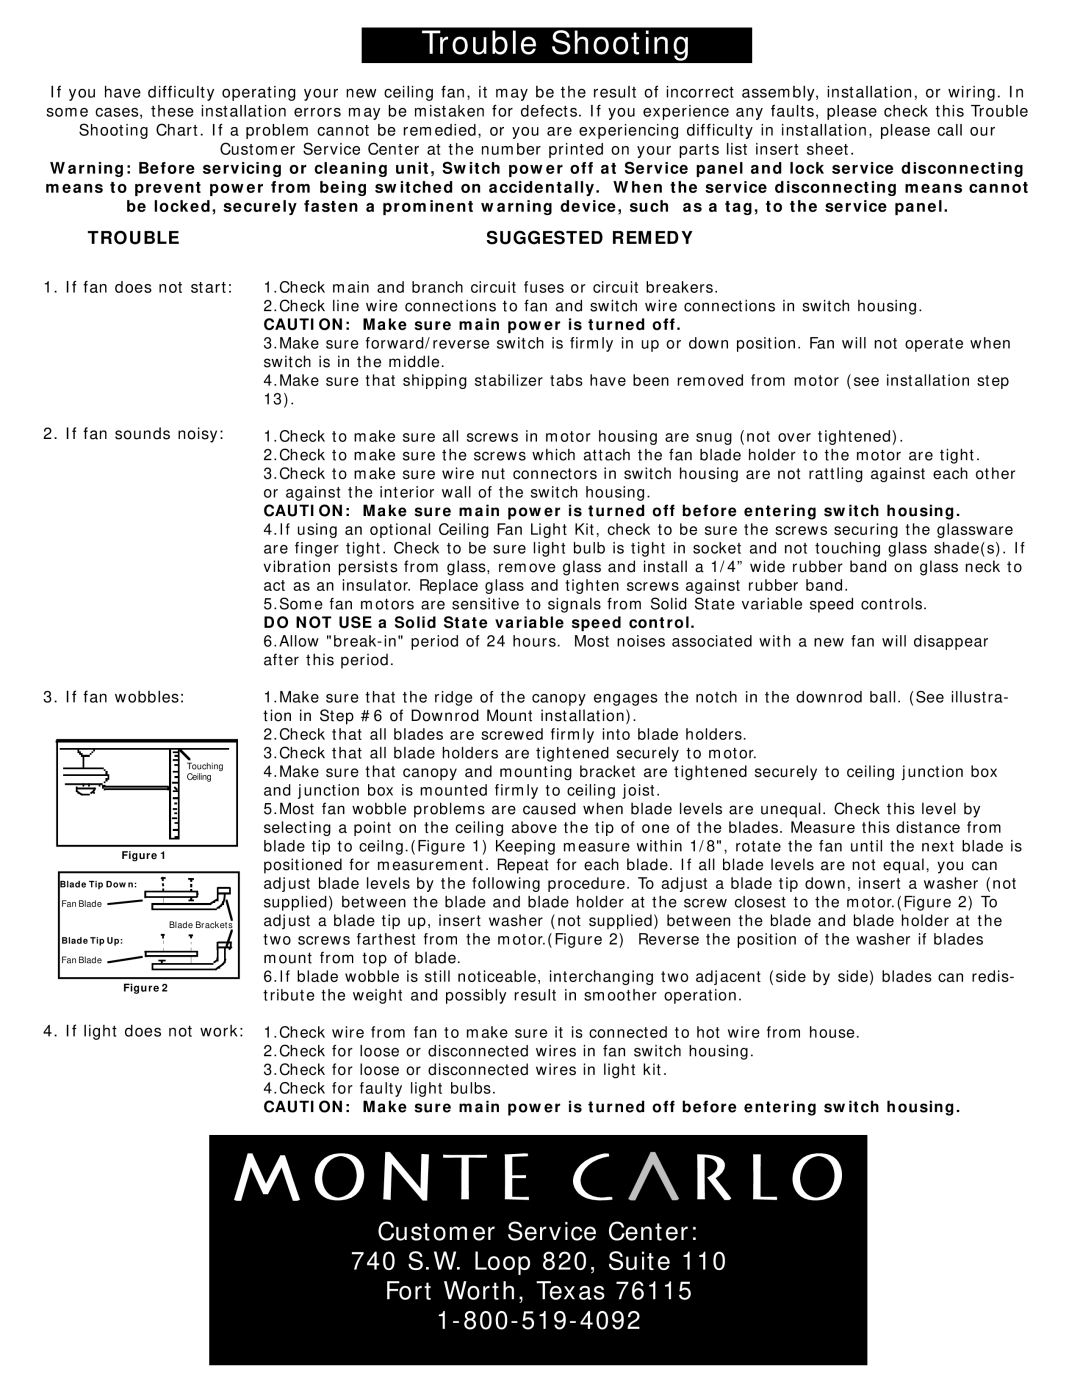 Monte Carlo Fan Company 5DS52 owner manual Customer Service Center 740 S.W. Loop 820, Suite, Trouble, Suggested Remedy 